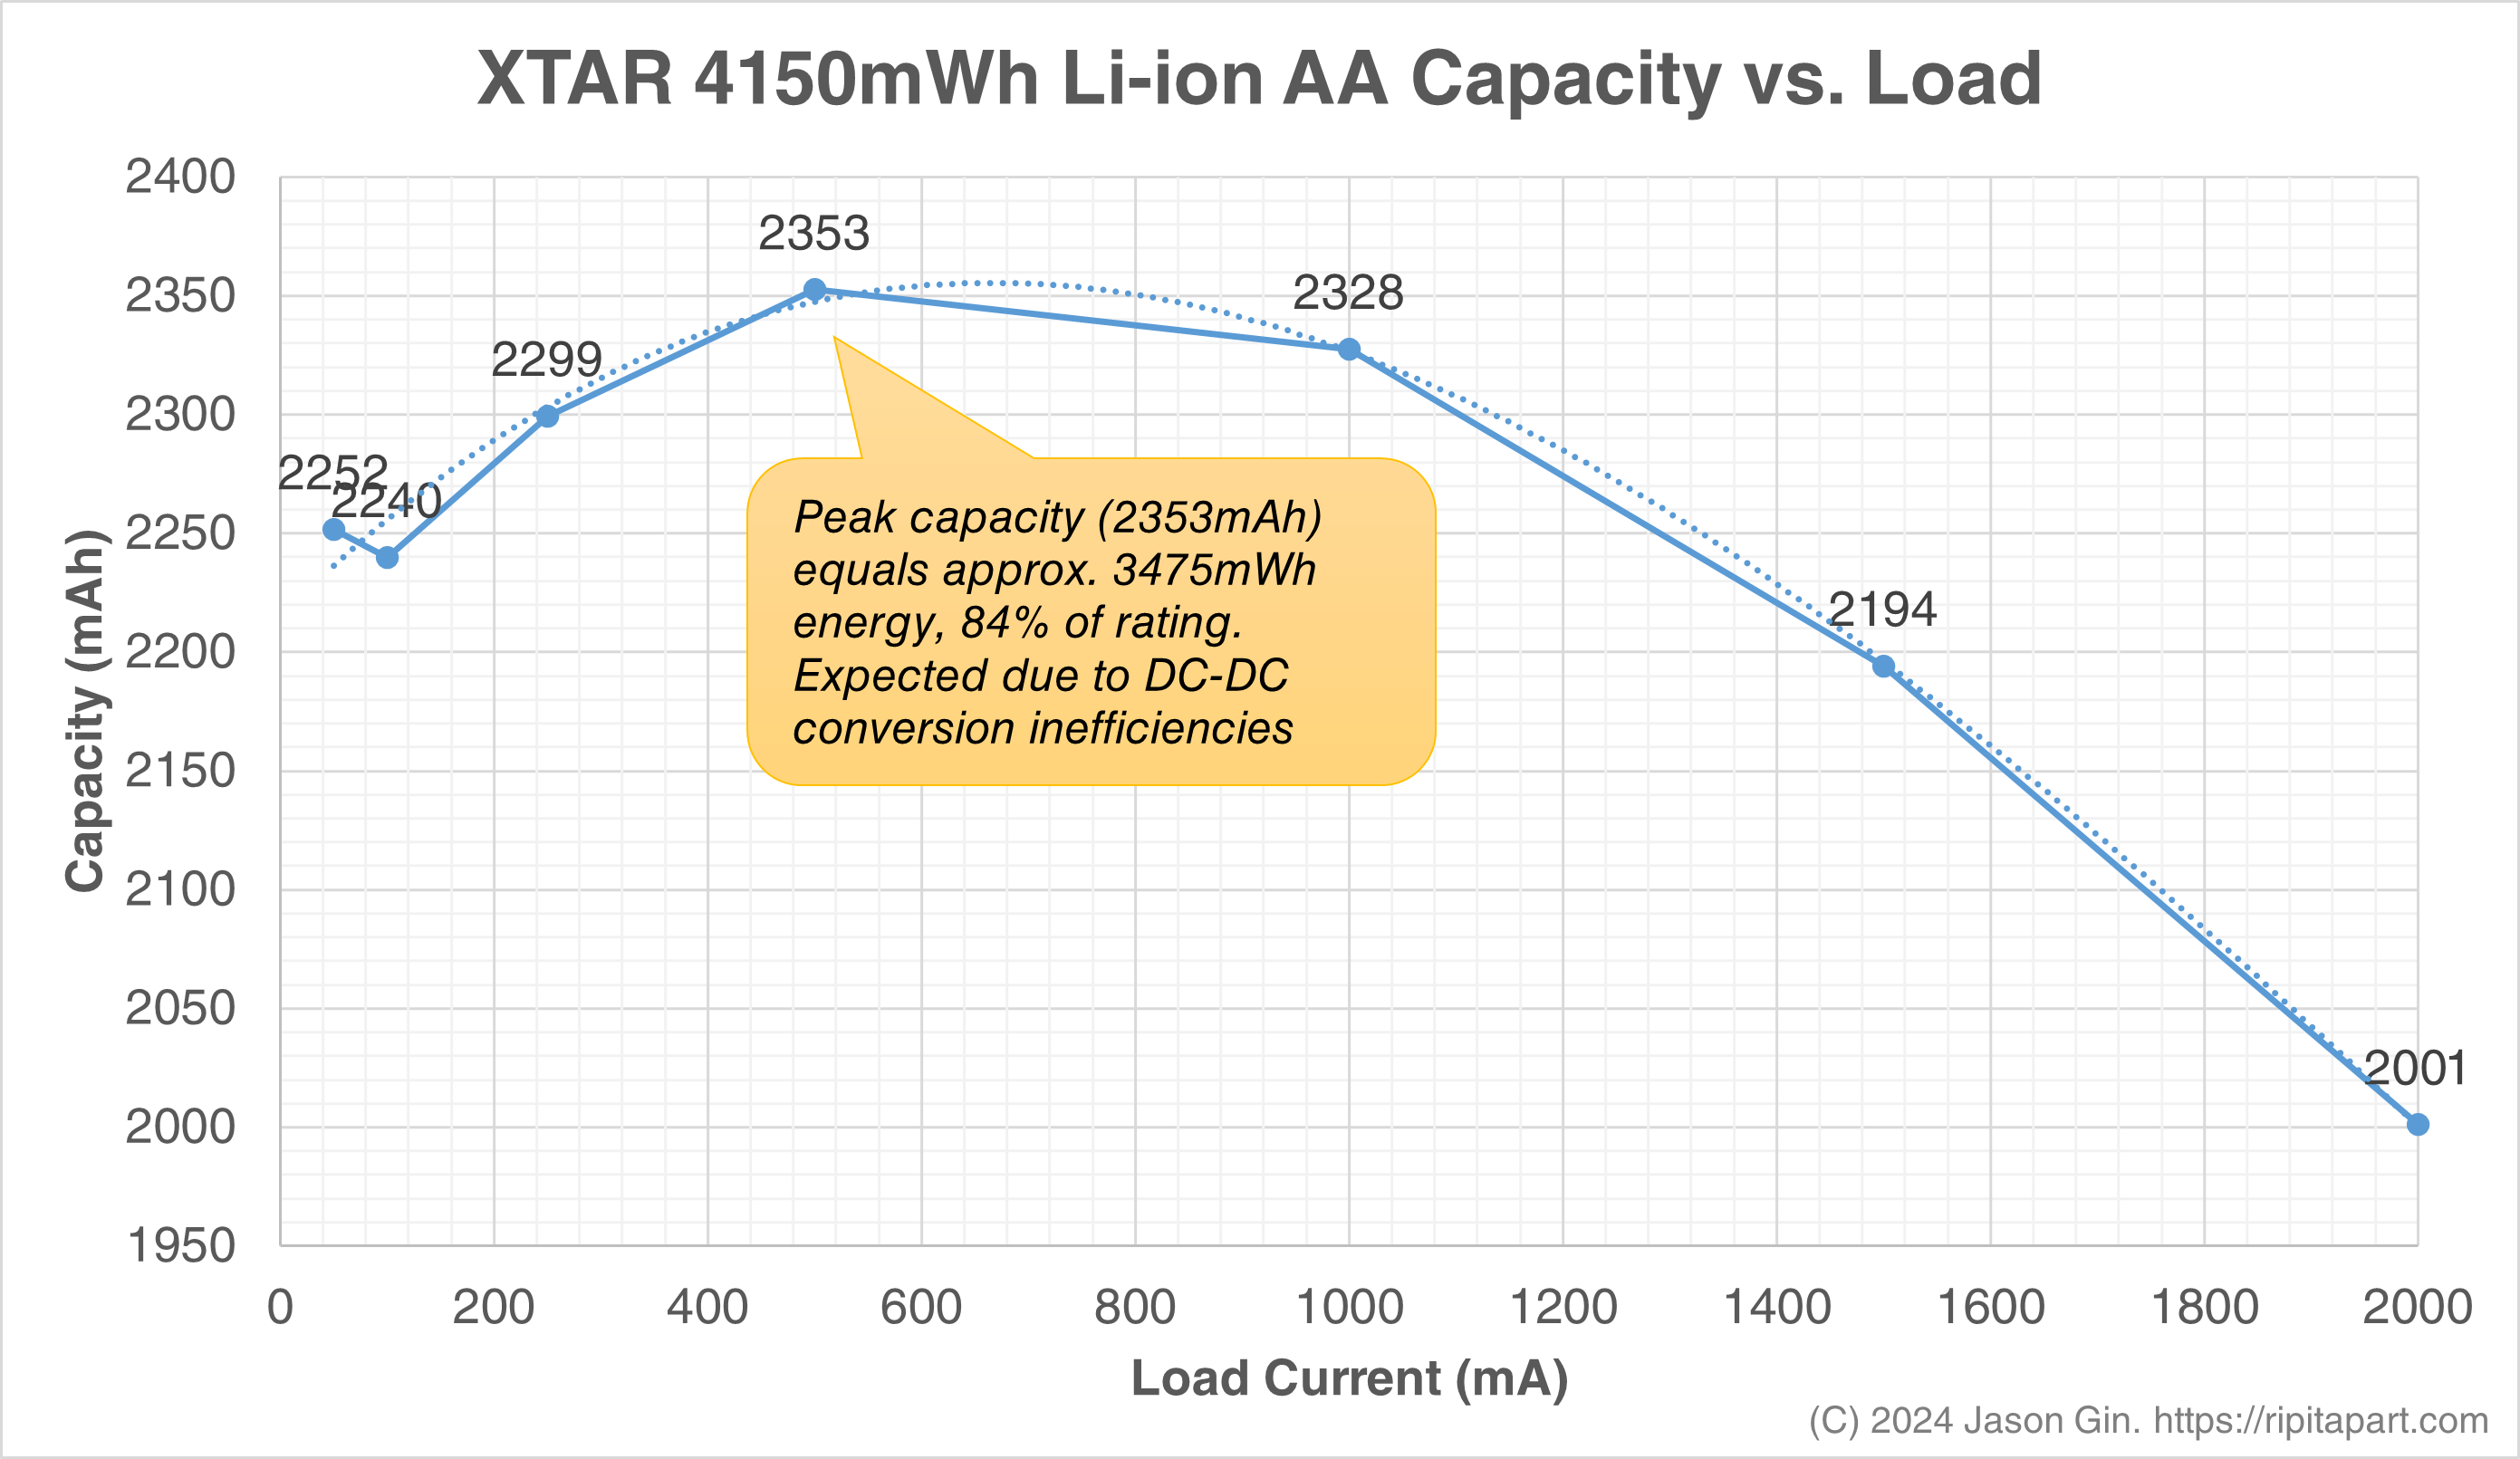 Chart showing the XTAR 4150mWh Li-ion AA's capacity at different load currents.